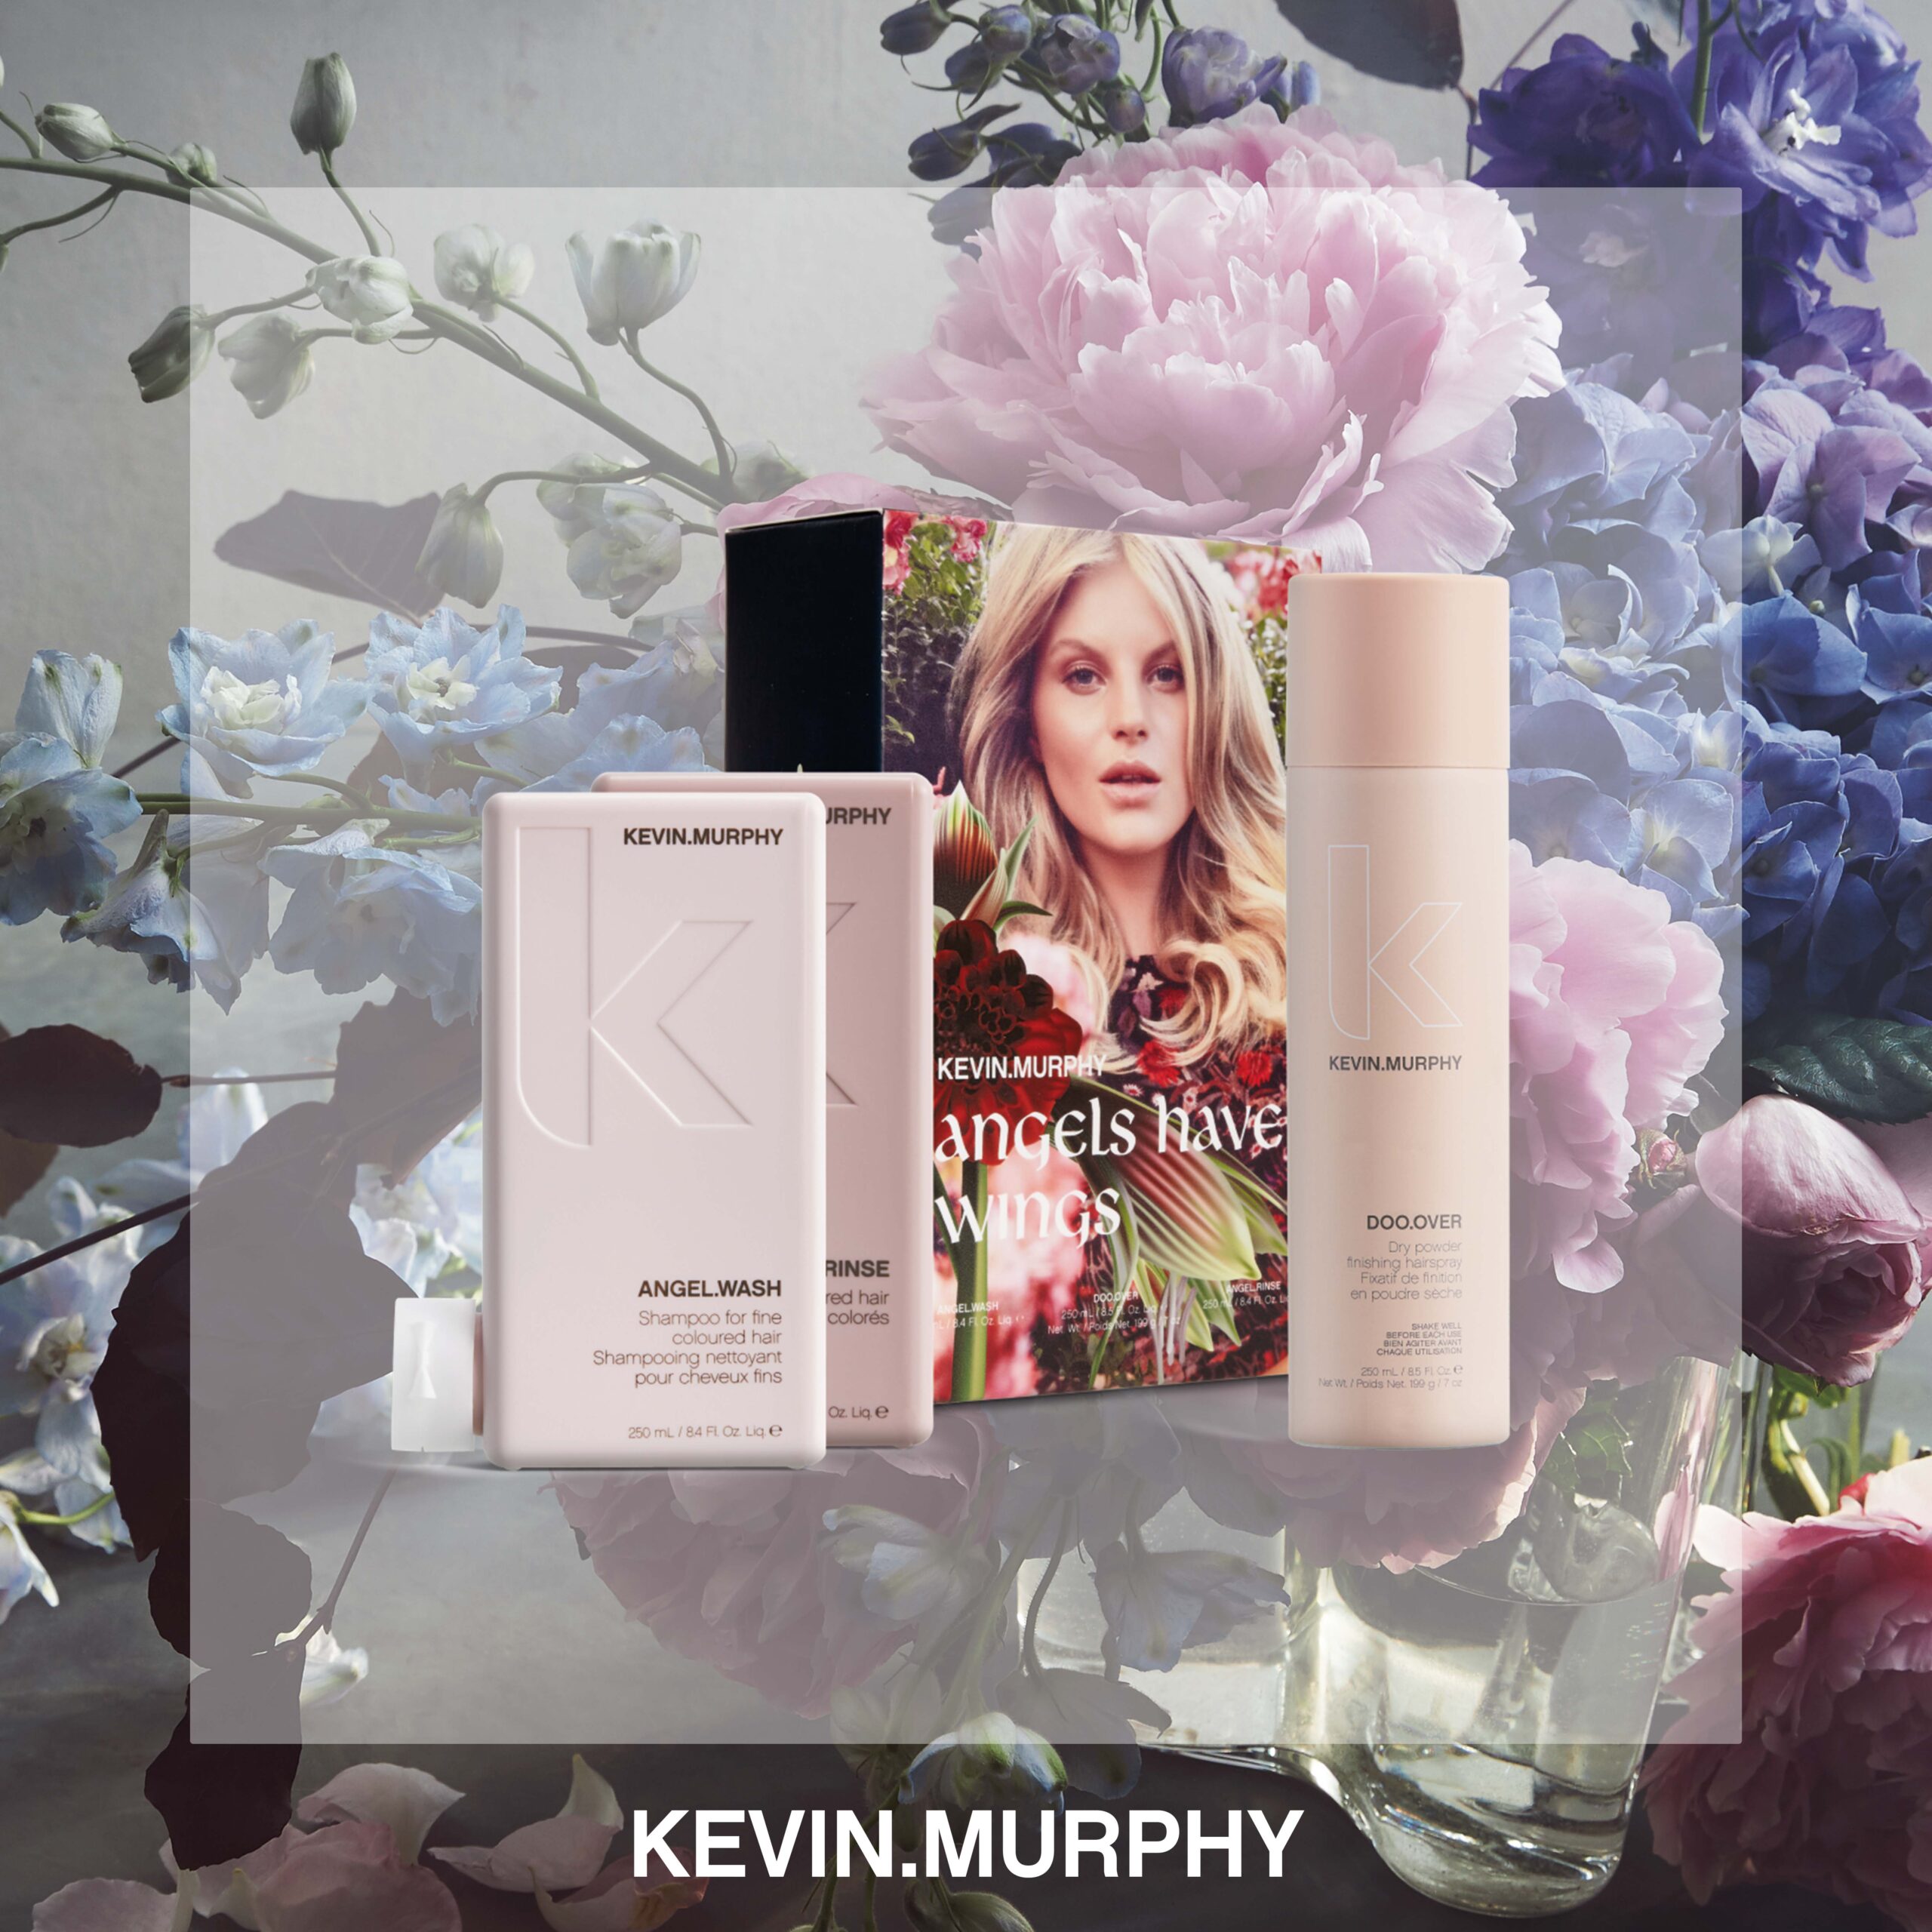 kevin murphy: angels have wings